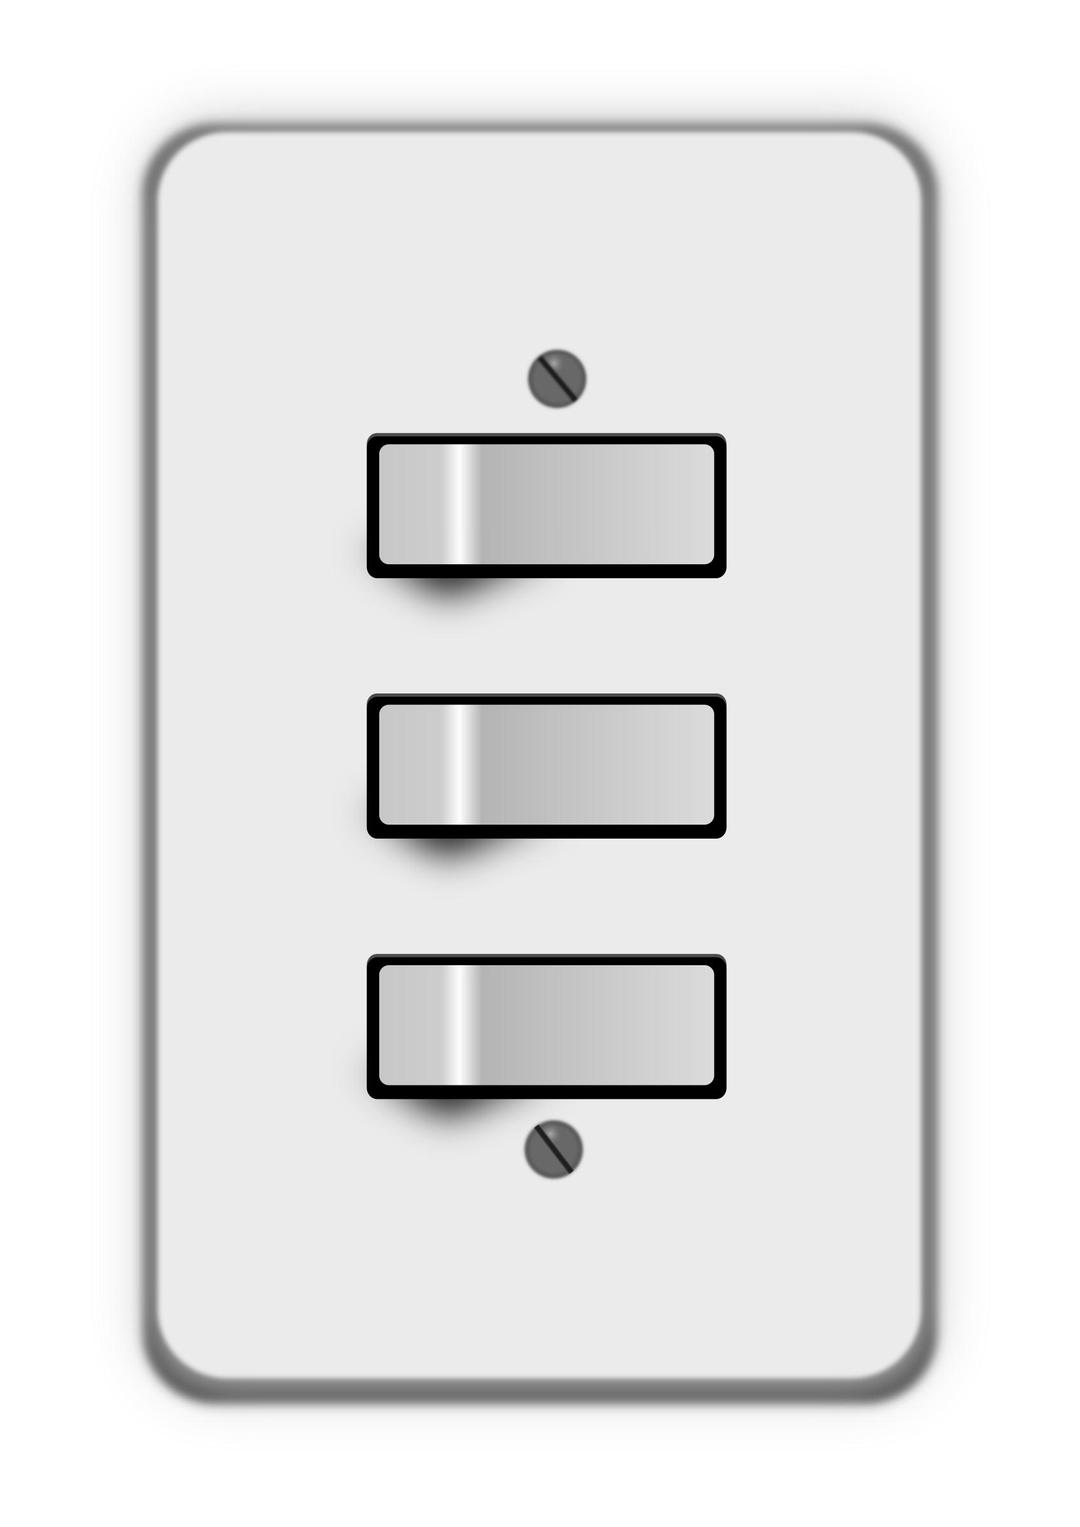 Light switch 3 switches (all on) png transparent